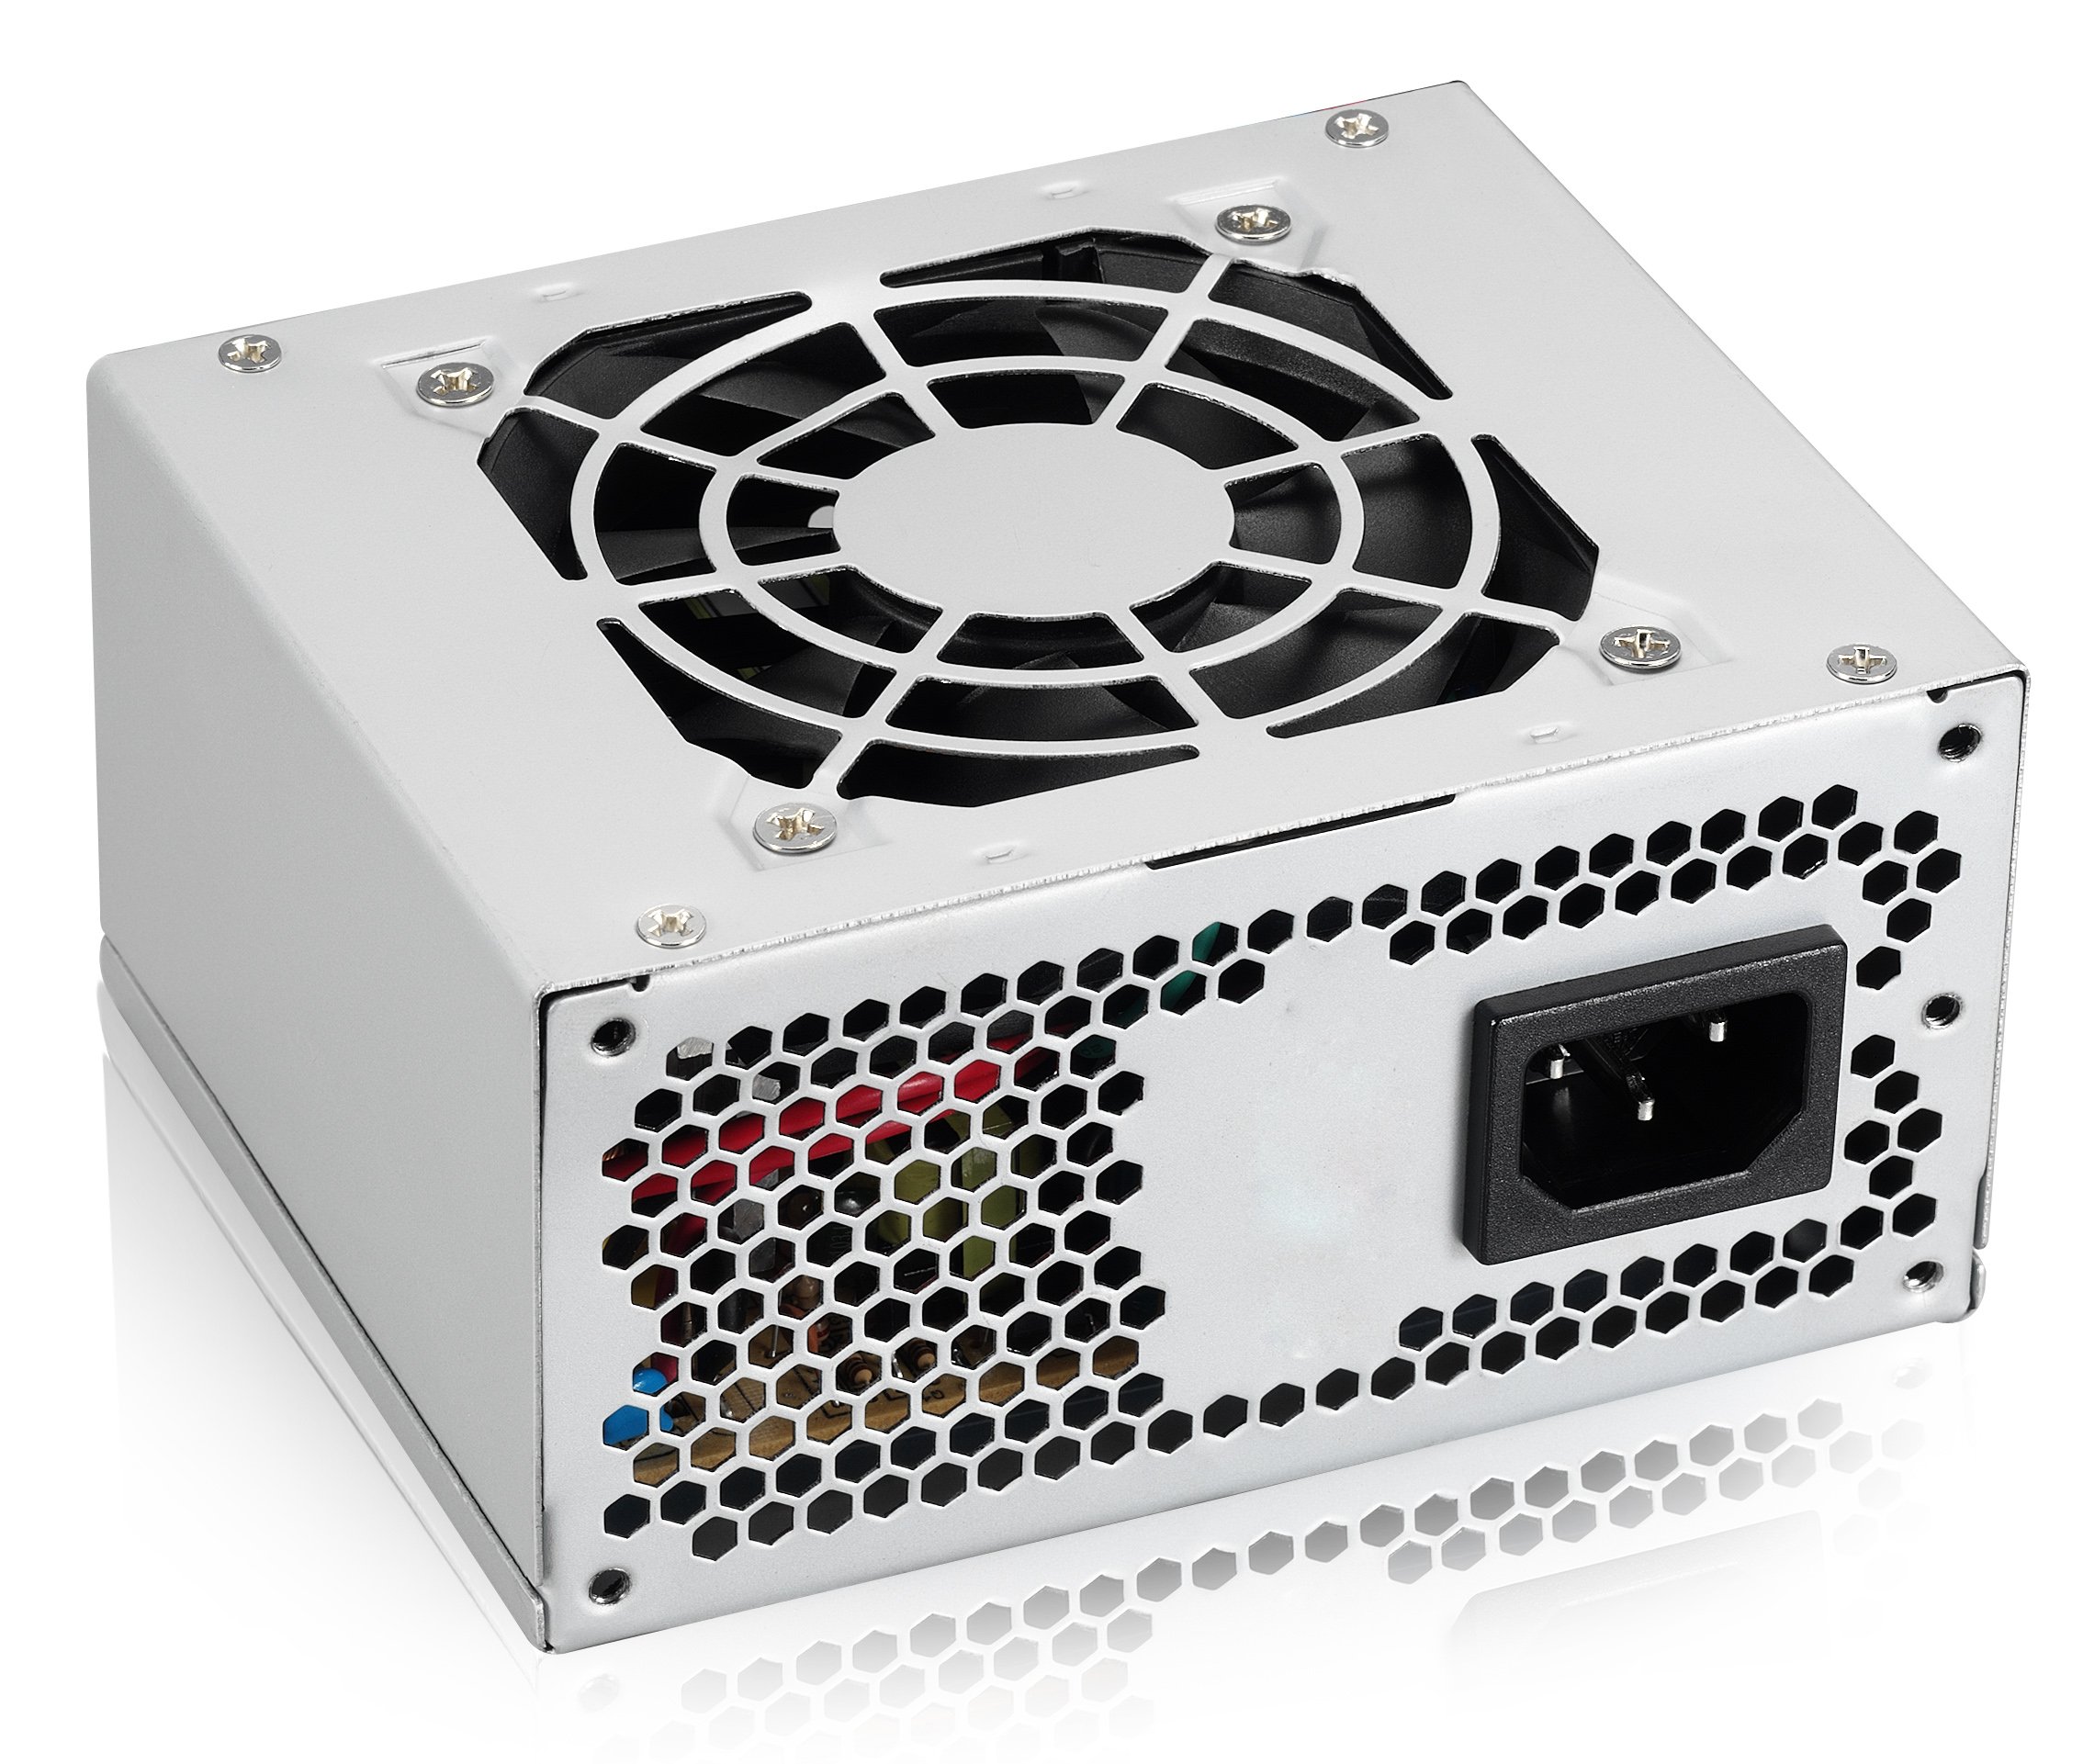 L-Link LL-PS-Micro 500 W Silver Power Supply Unit – Power Supply Units (500 W, 8 cm, 1 Fan (S), Side, Active, 20 + 4 Pin ATX)